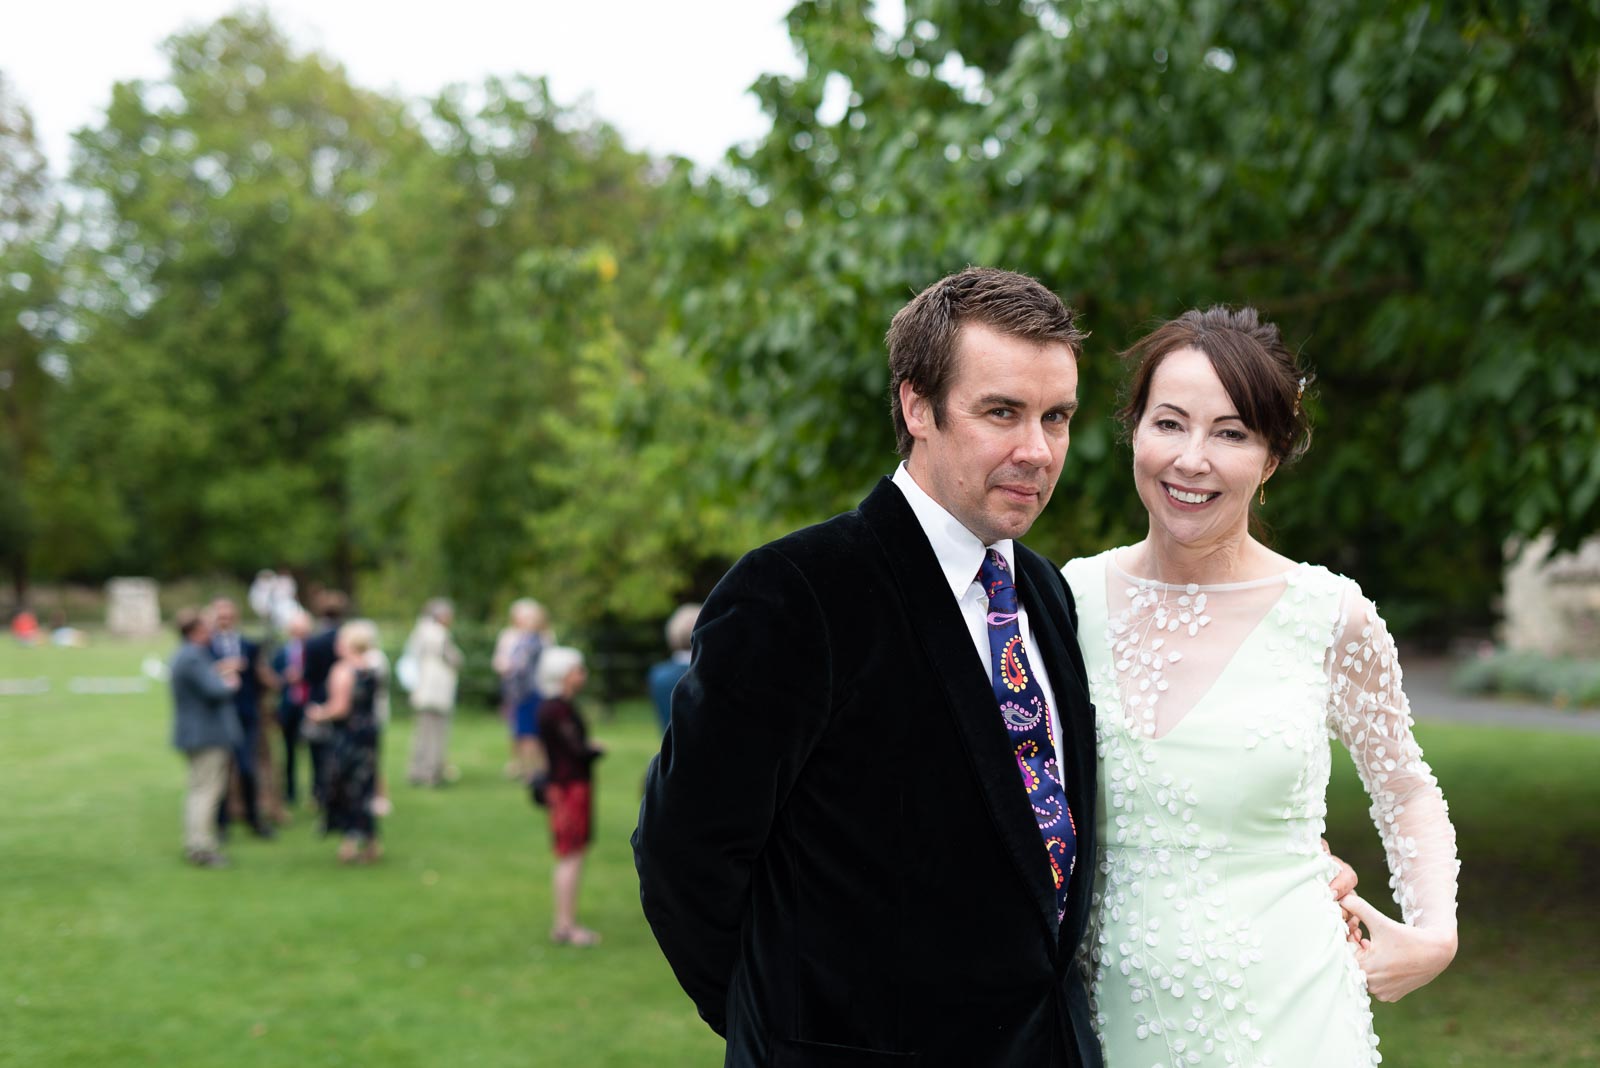 Fiona and Richard walk past their guests in Southover Grange, Lewes after their wedding.